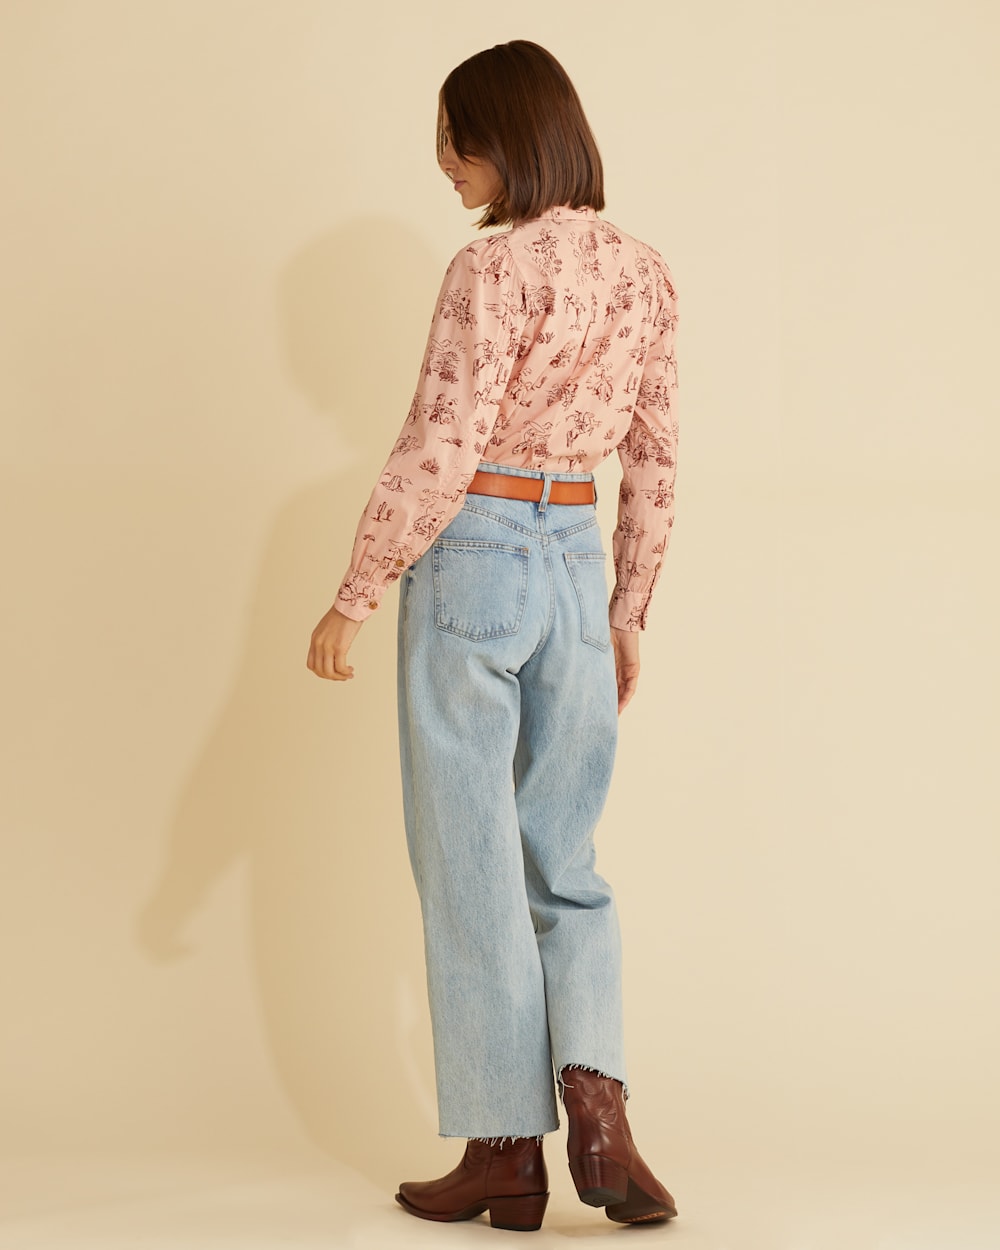 ALTERNATE VIEW OF WOMEN'S WINONA PUFF SLEEVE SHIRT IN MISTY ROSE COWGIRL image number 3